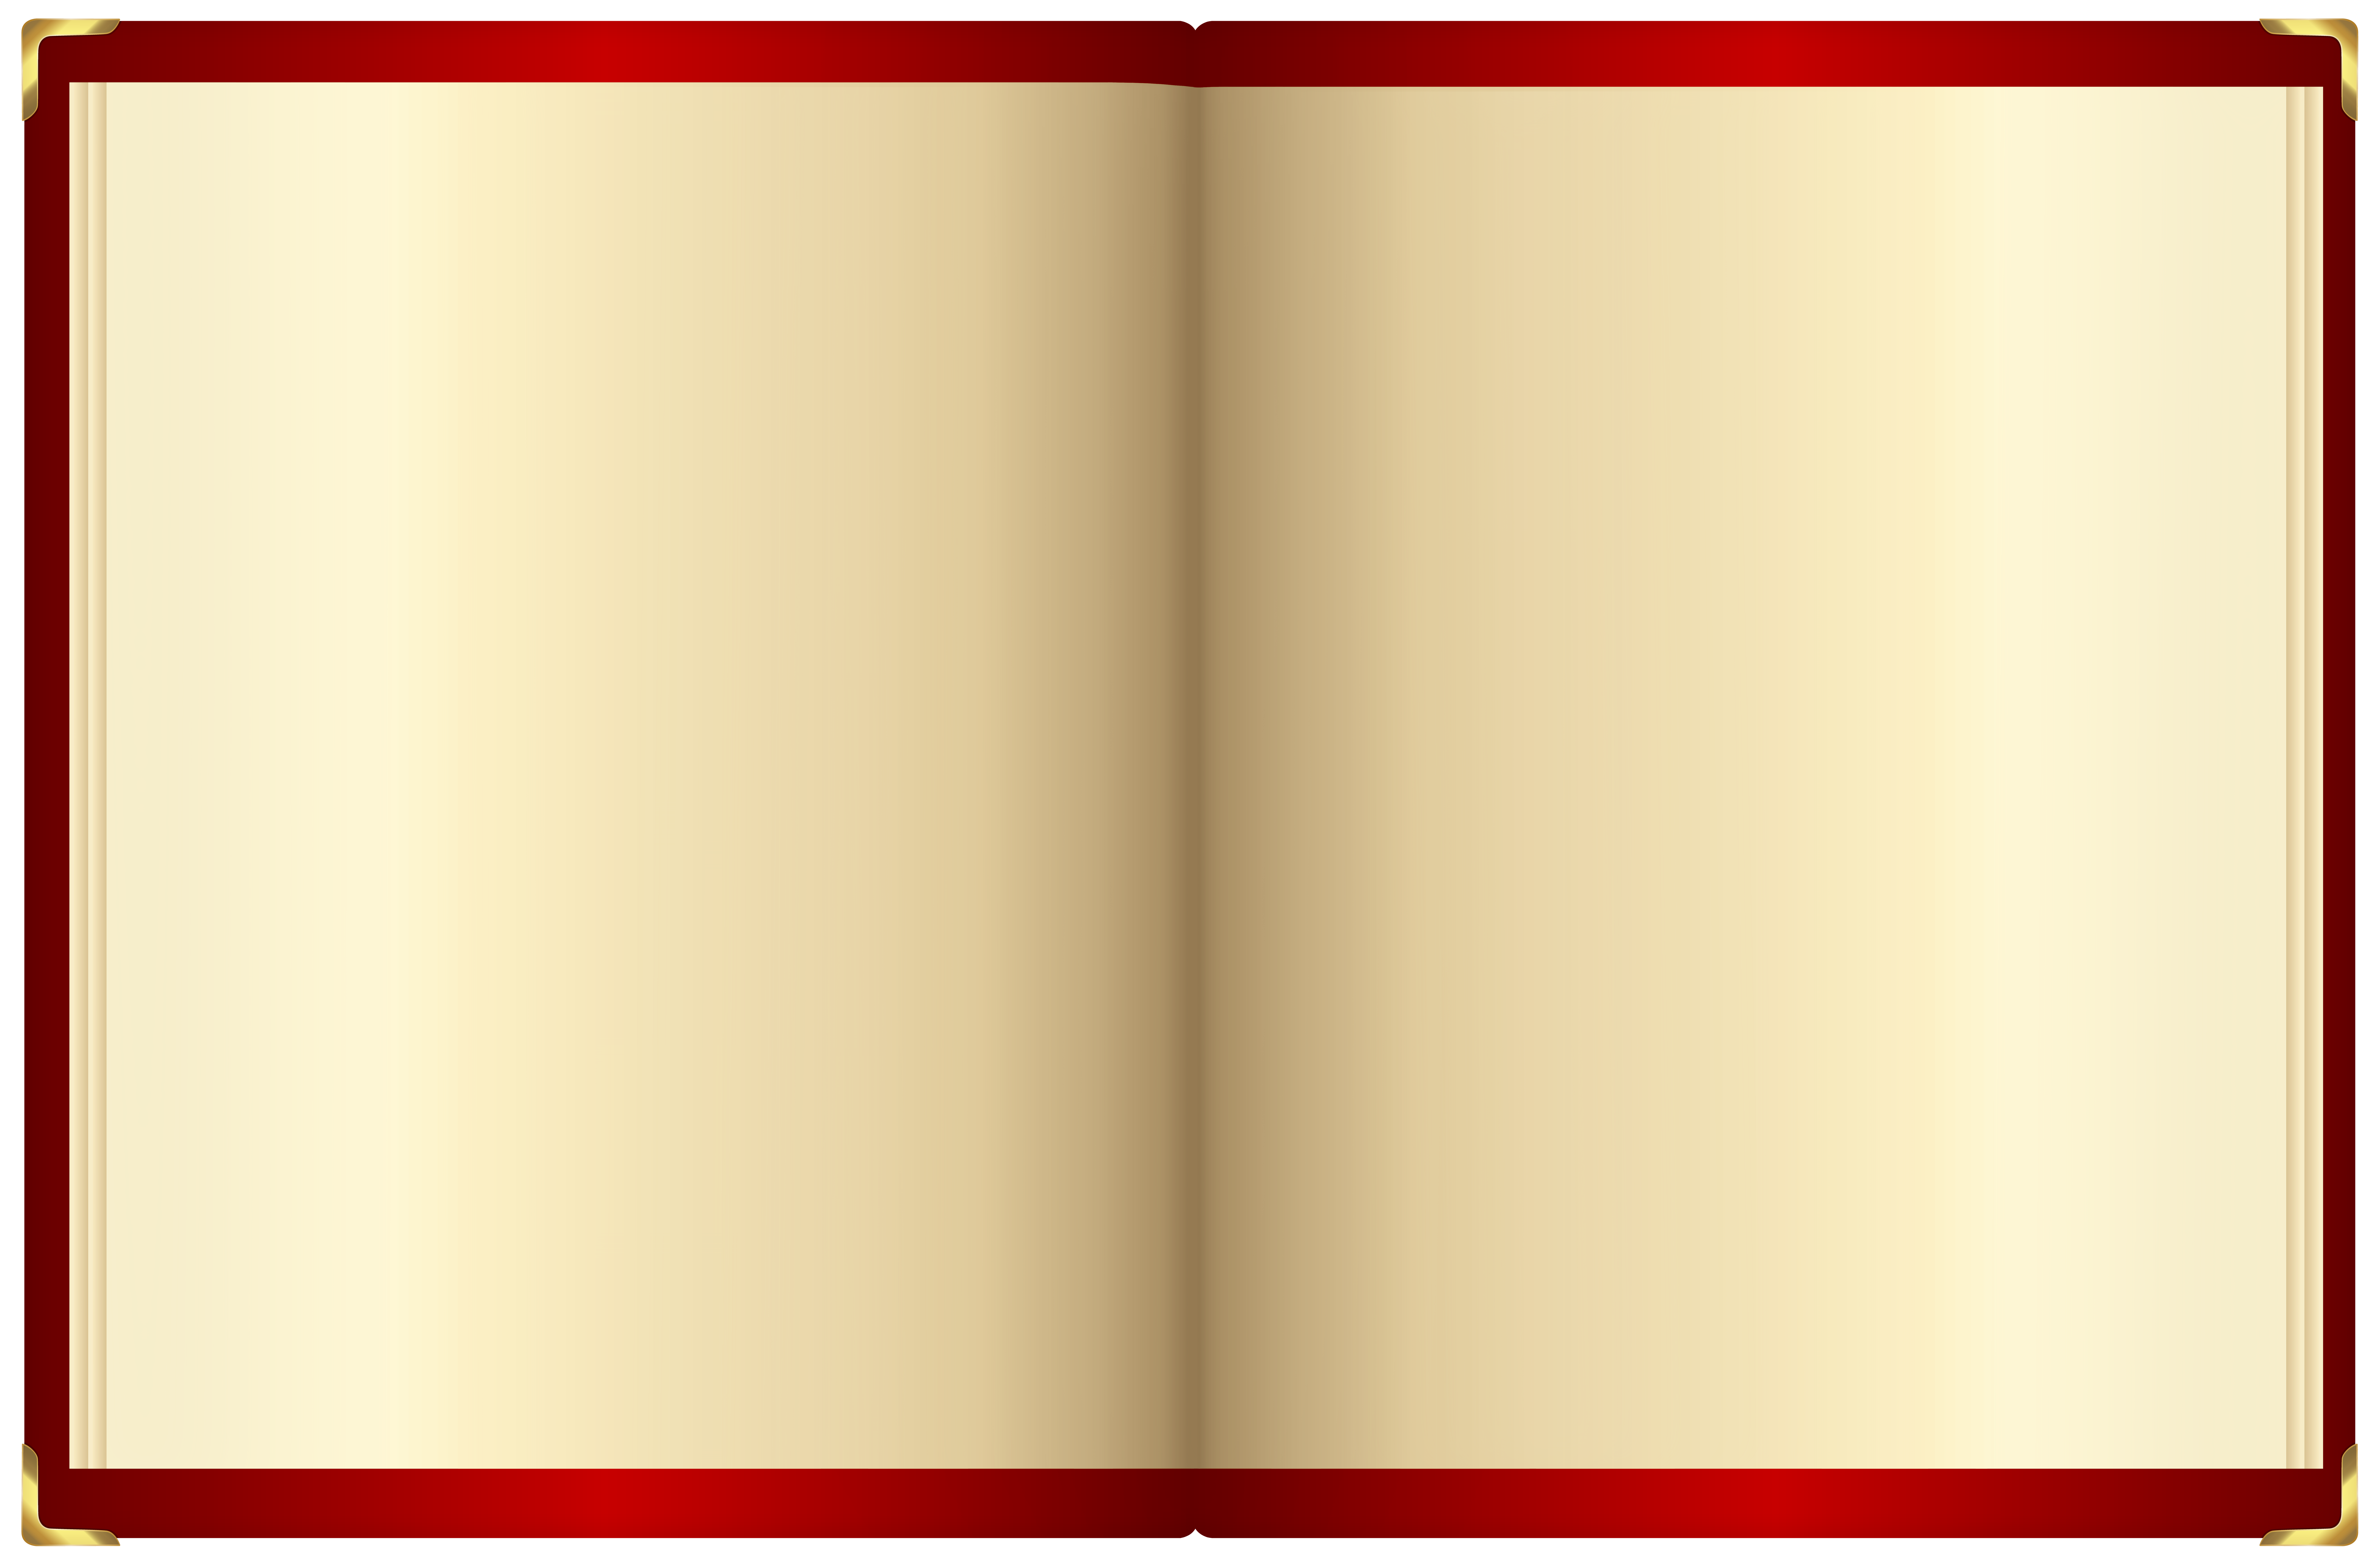 red book clipart